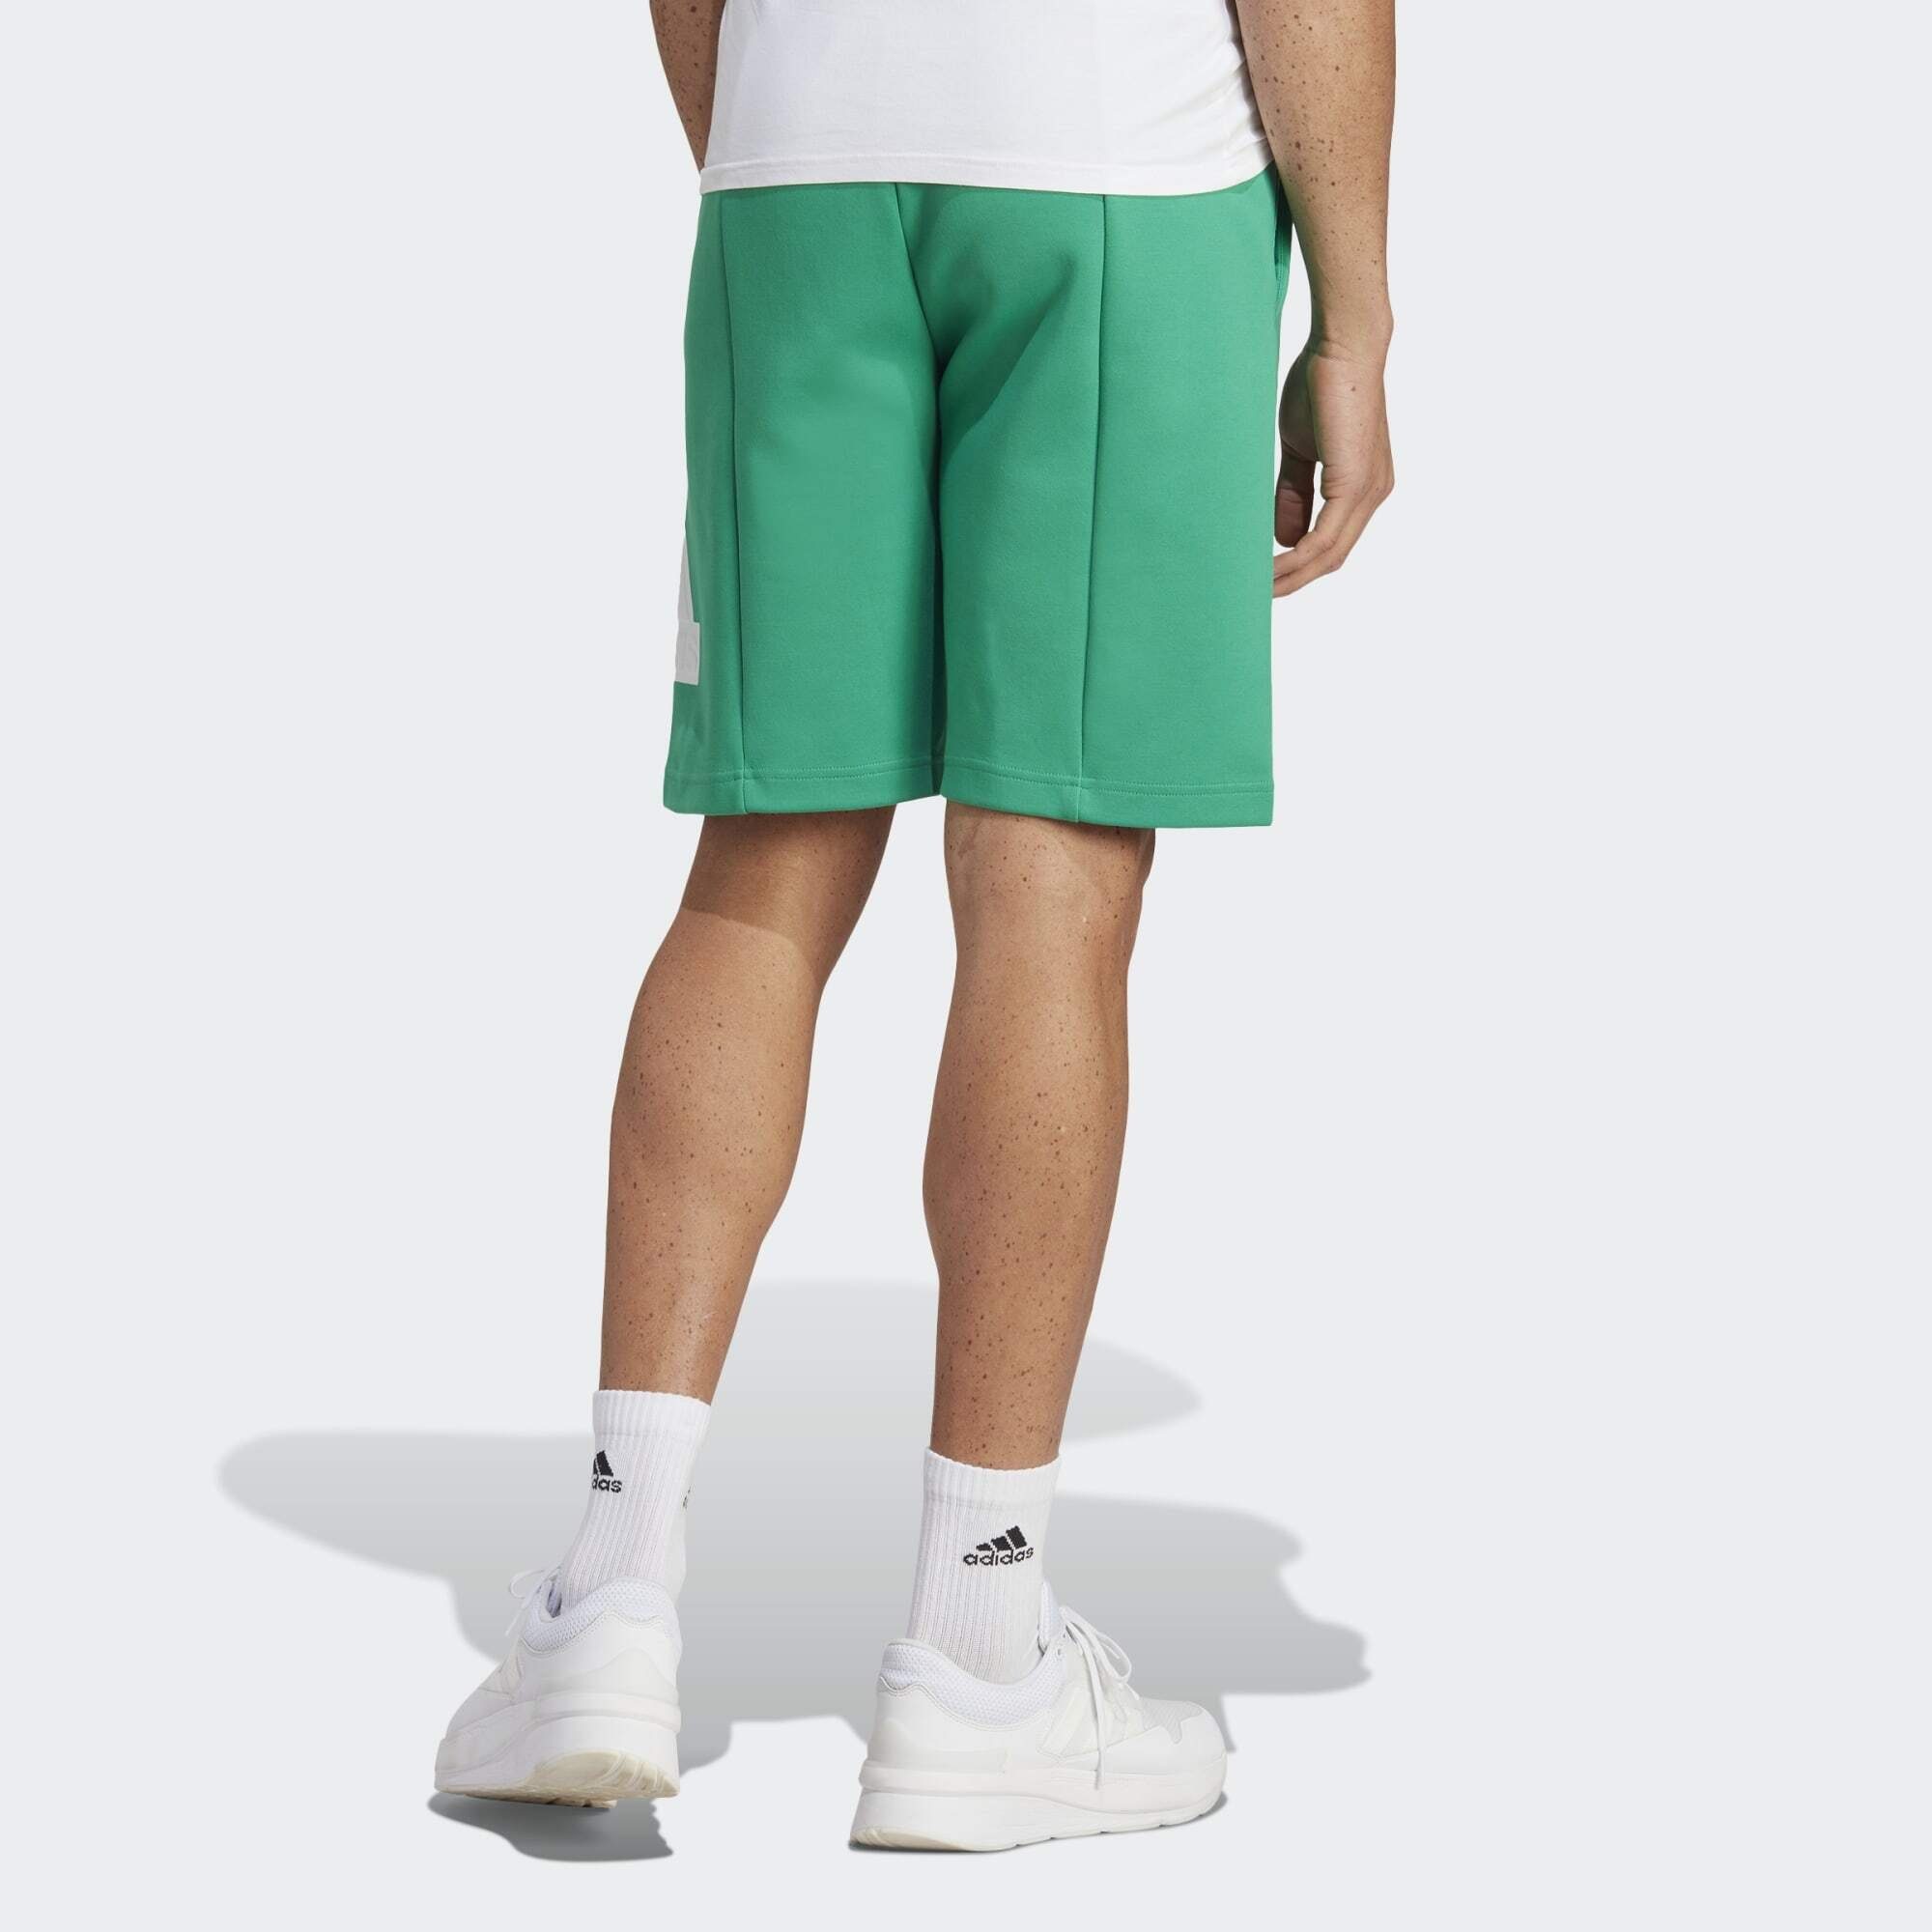 Sportswear SHORTS Funktionsshorts OF Court ICONS adidas BADGE SPORT FUTURE Green